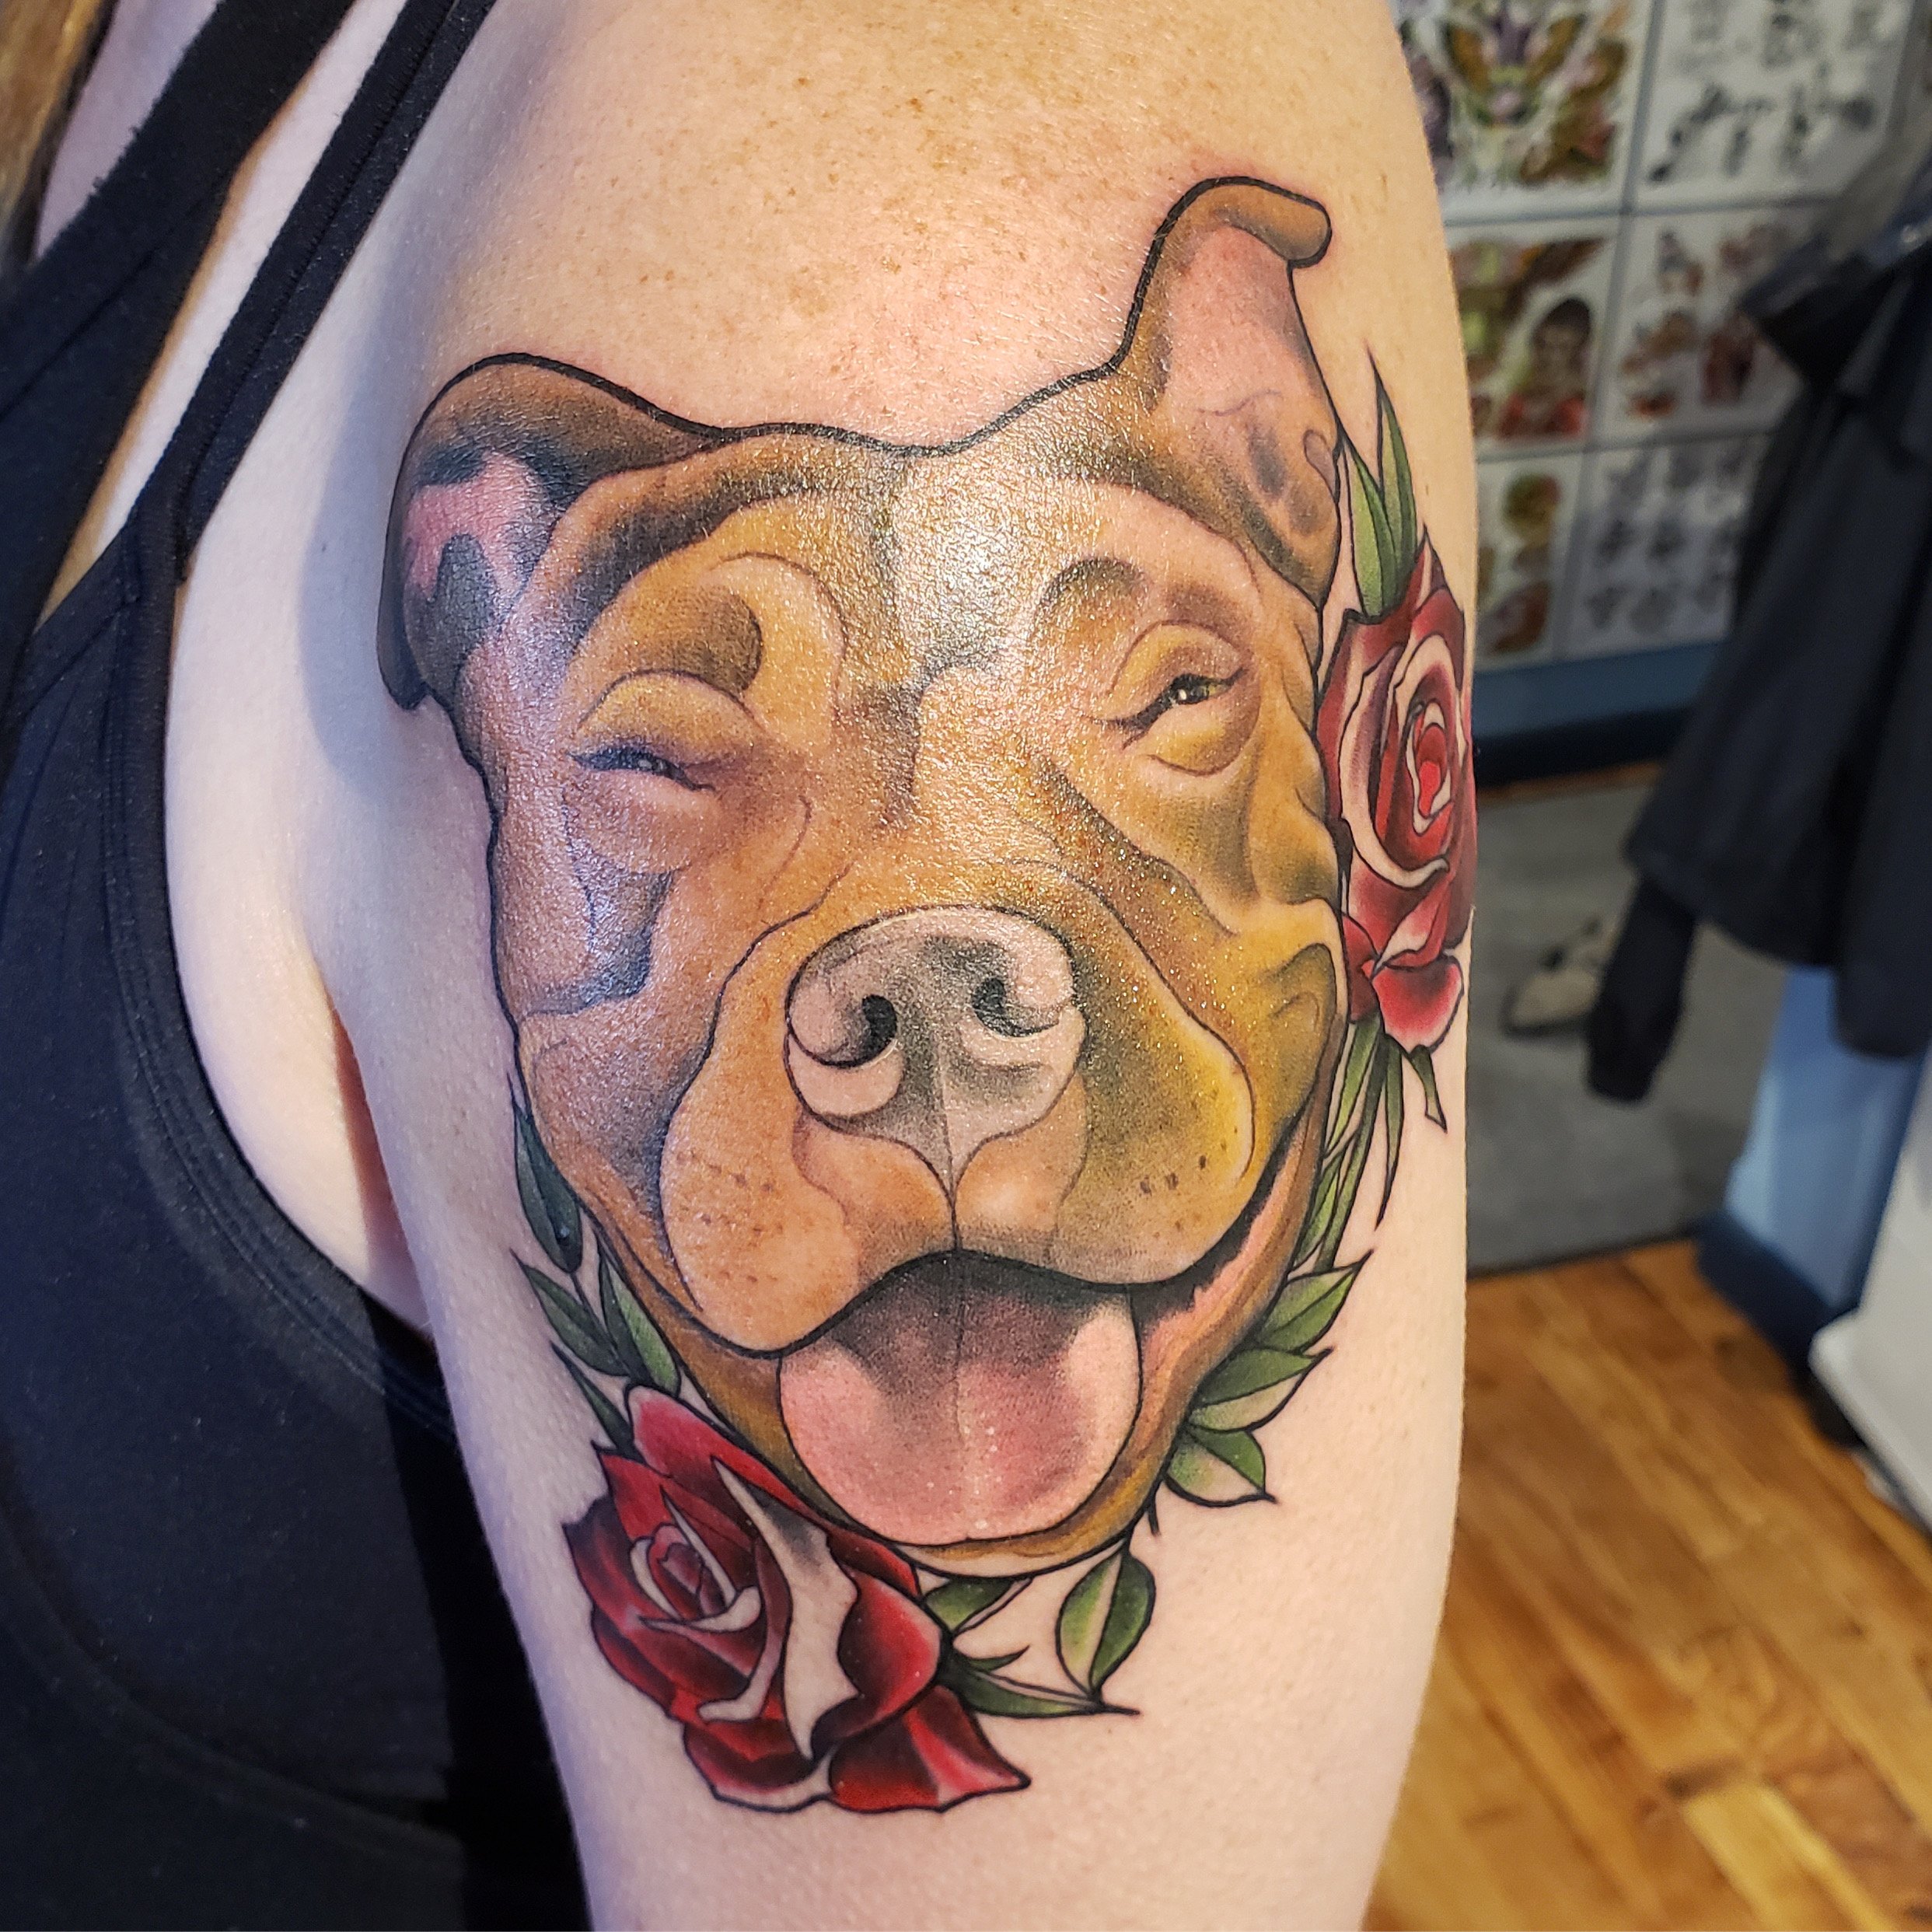 calico-queen-tattoo-candice-bradley-tattoo-artist-crested-butte-neo-traditional-realism-memorial-tattoo-color-work.jpeg